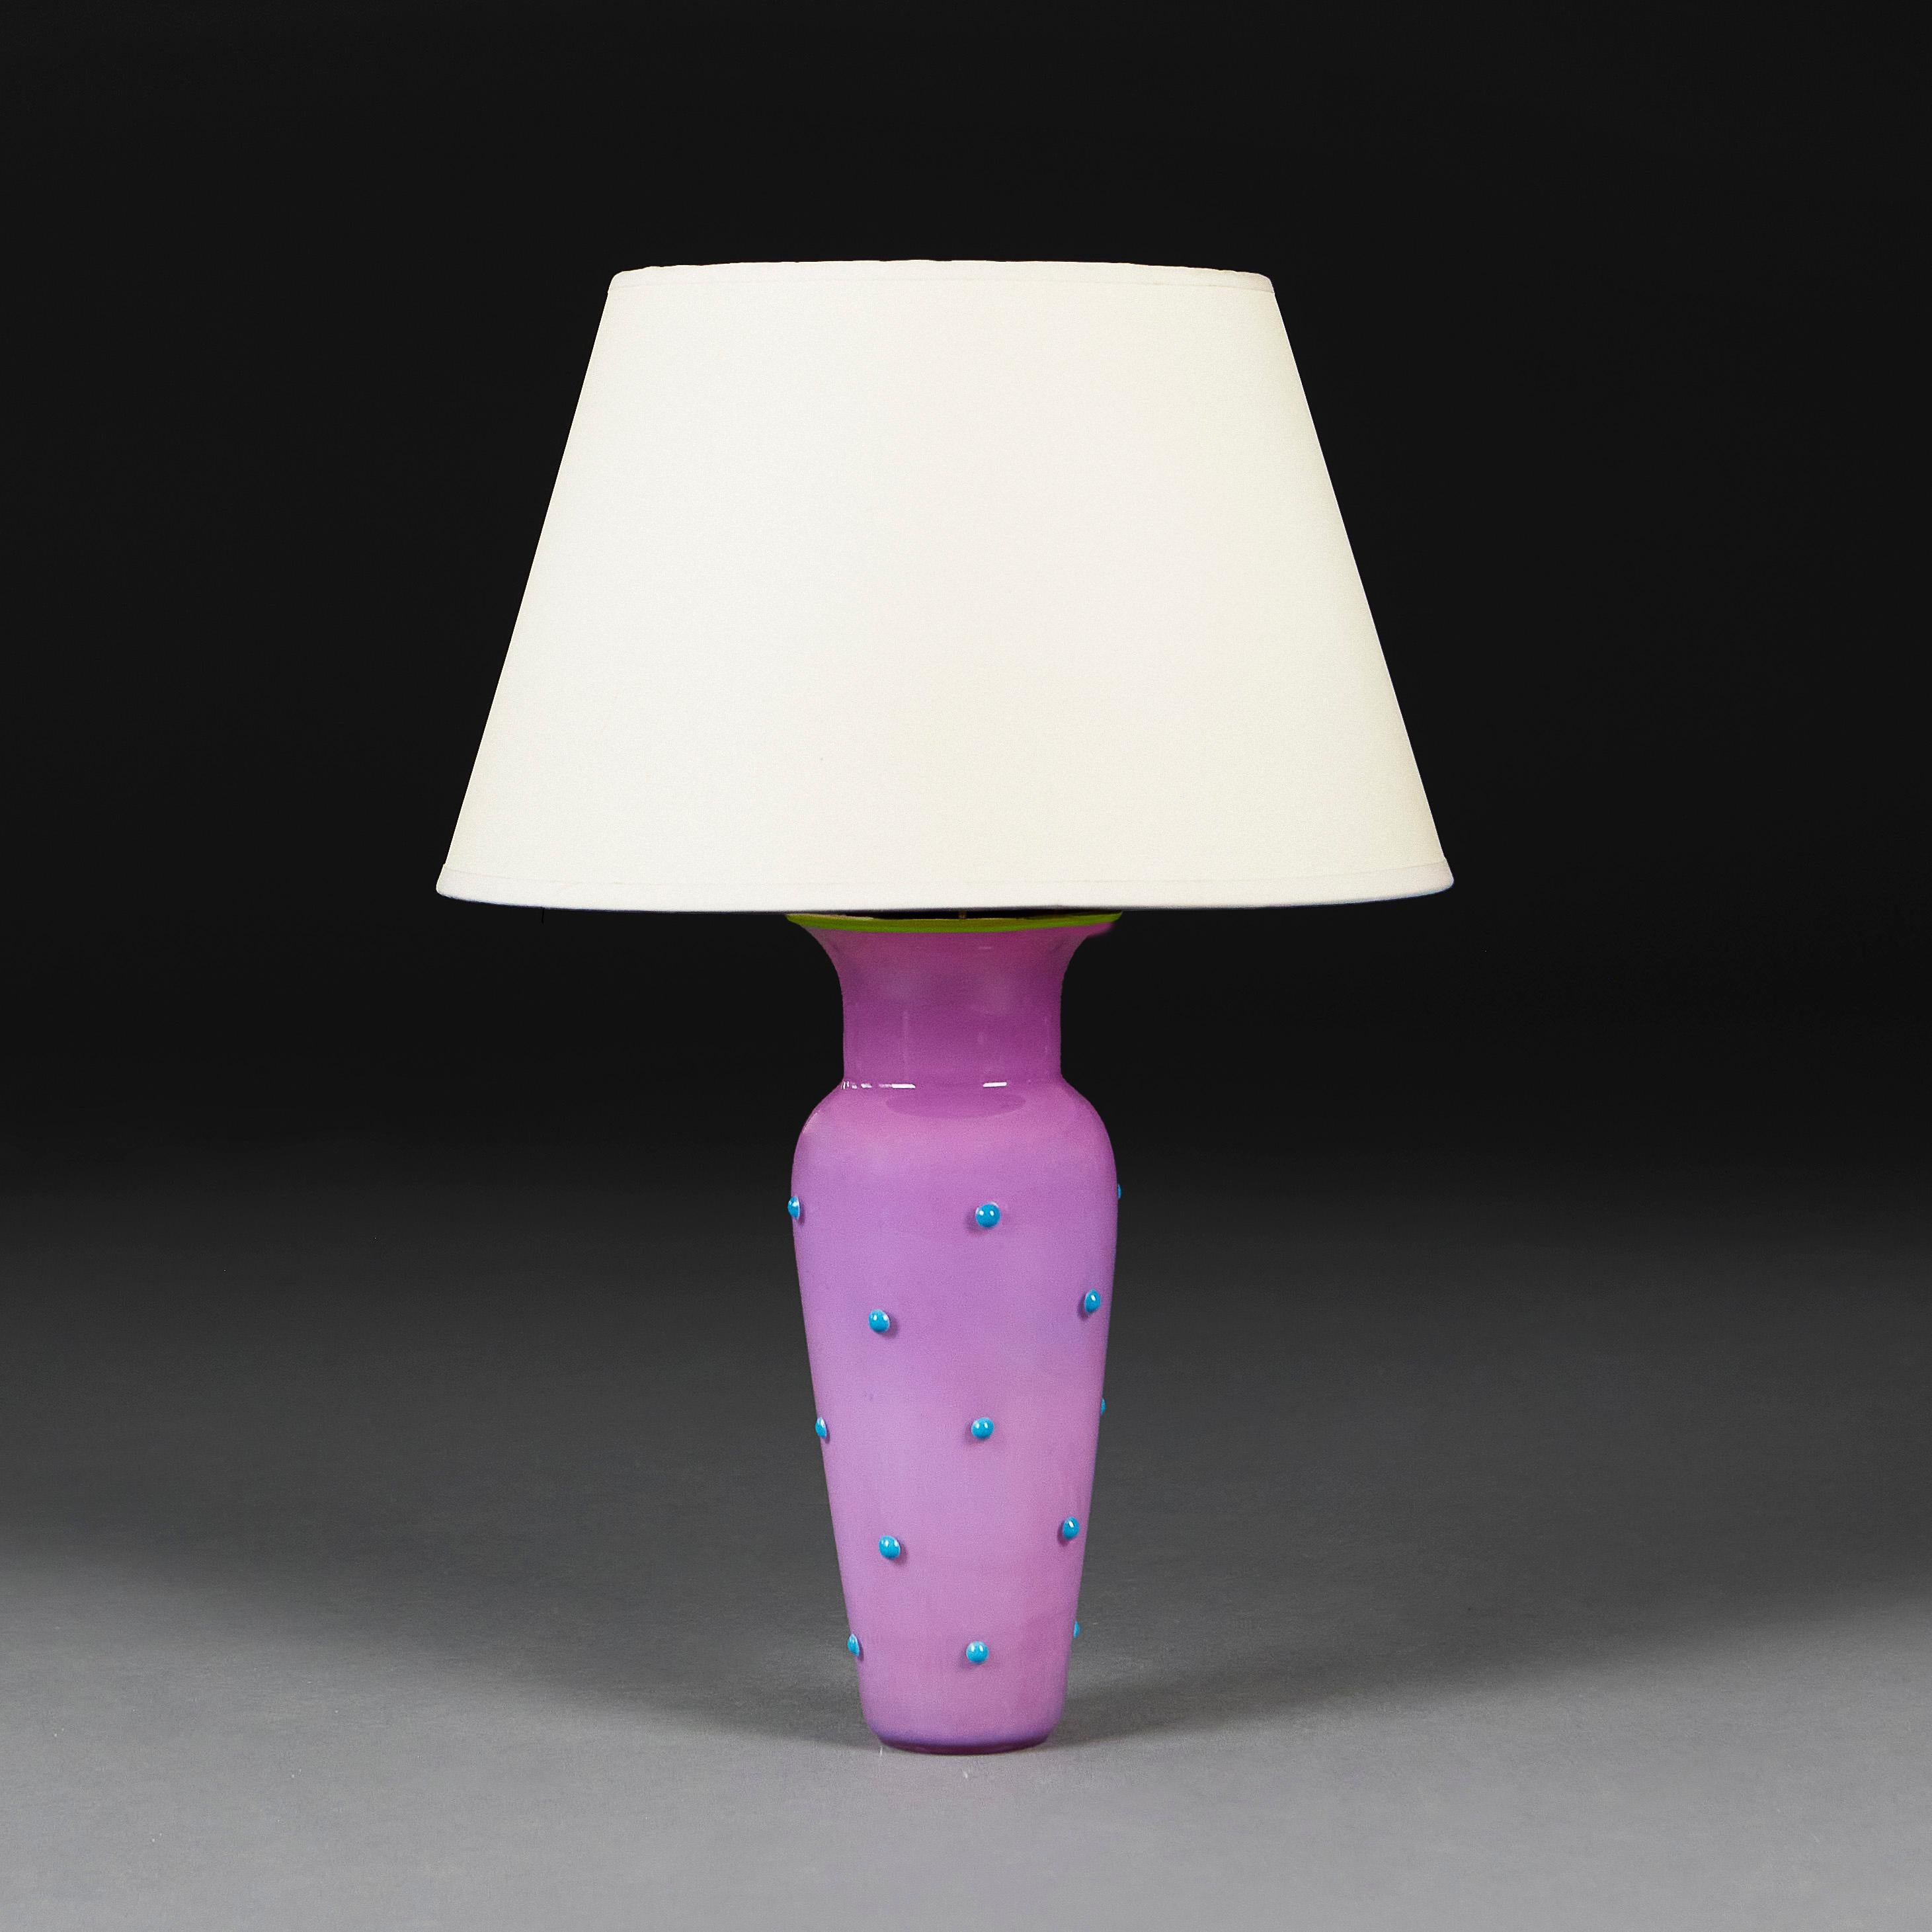 Italy, circa 1950
An unusual mid twentieth century Murano glass vase with lilac ground and blue polka dots, with vivid green rim, now as a lamp. 

Height of vase    30.00cm
Diameter of base   8.00cm

Please note:
Lamp has been photographed with a